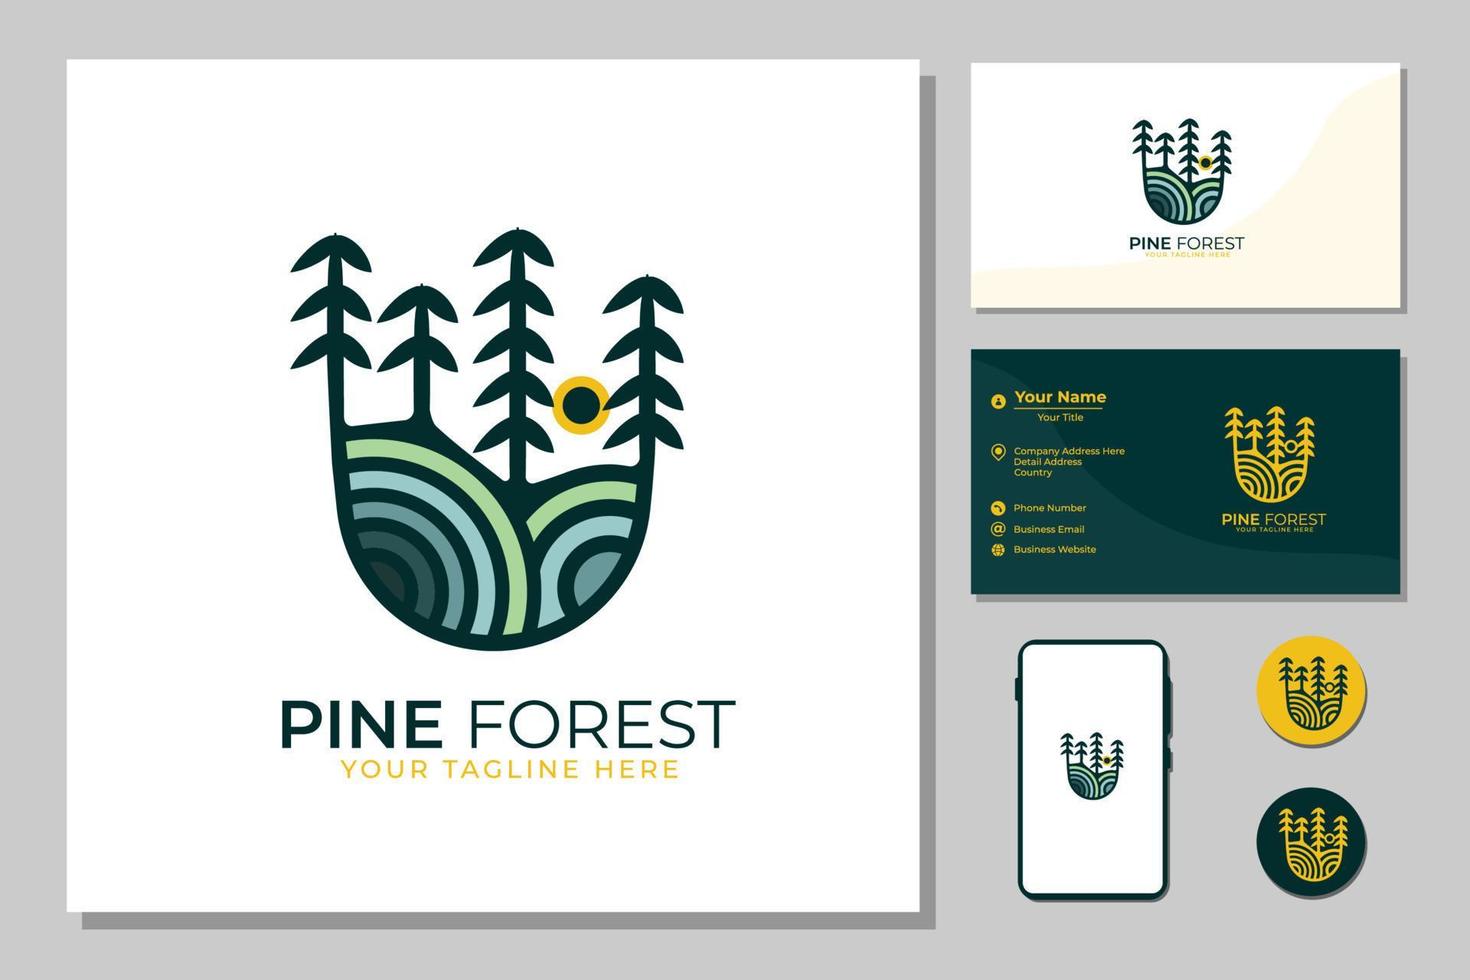 Evergreen Pines Fir Conifer Hemlock Tree Forest and Creek River for Mountain Hill Camp Adventure Vintage Retro Hipster Logo vector